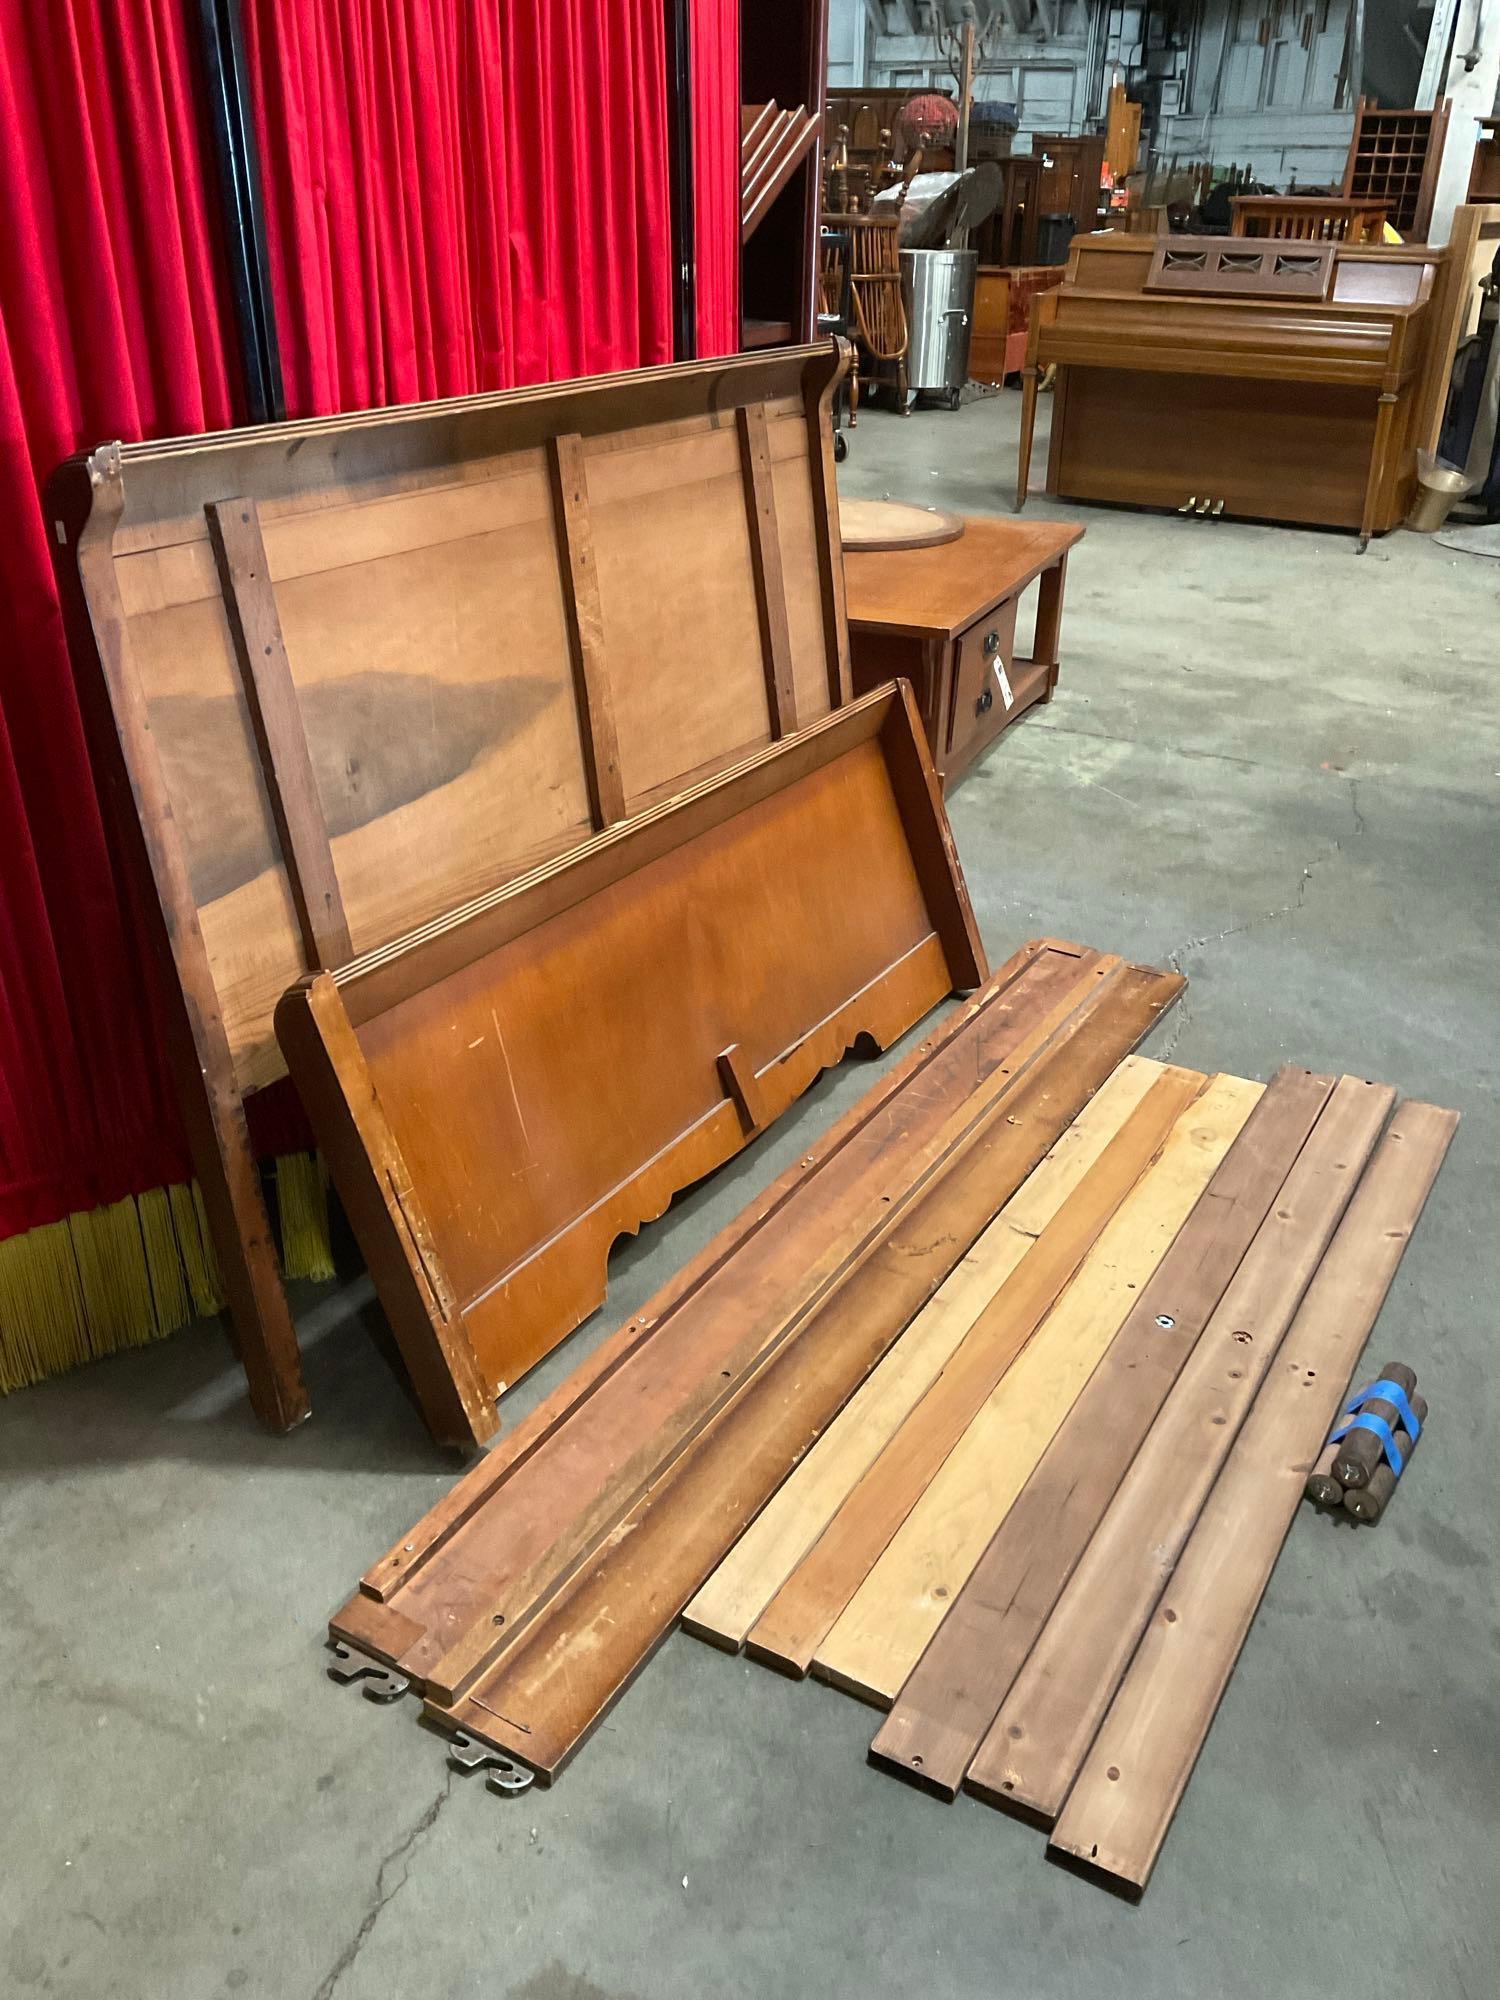 Vintage Art Deco Waterfall Full Sized Wooden Bed Frame & Supports. Stands 43" Tall. See pics.